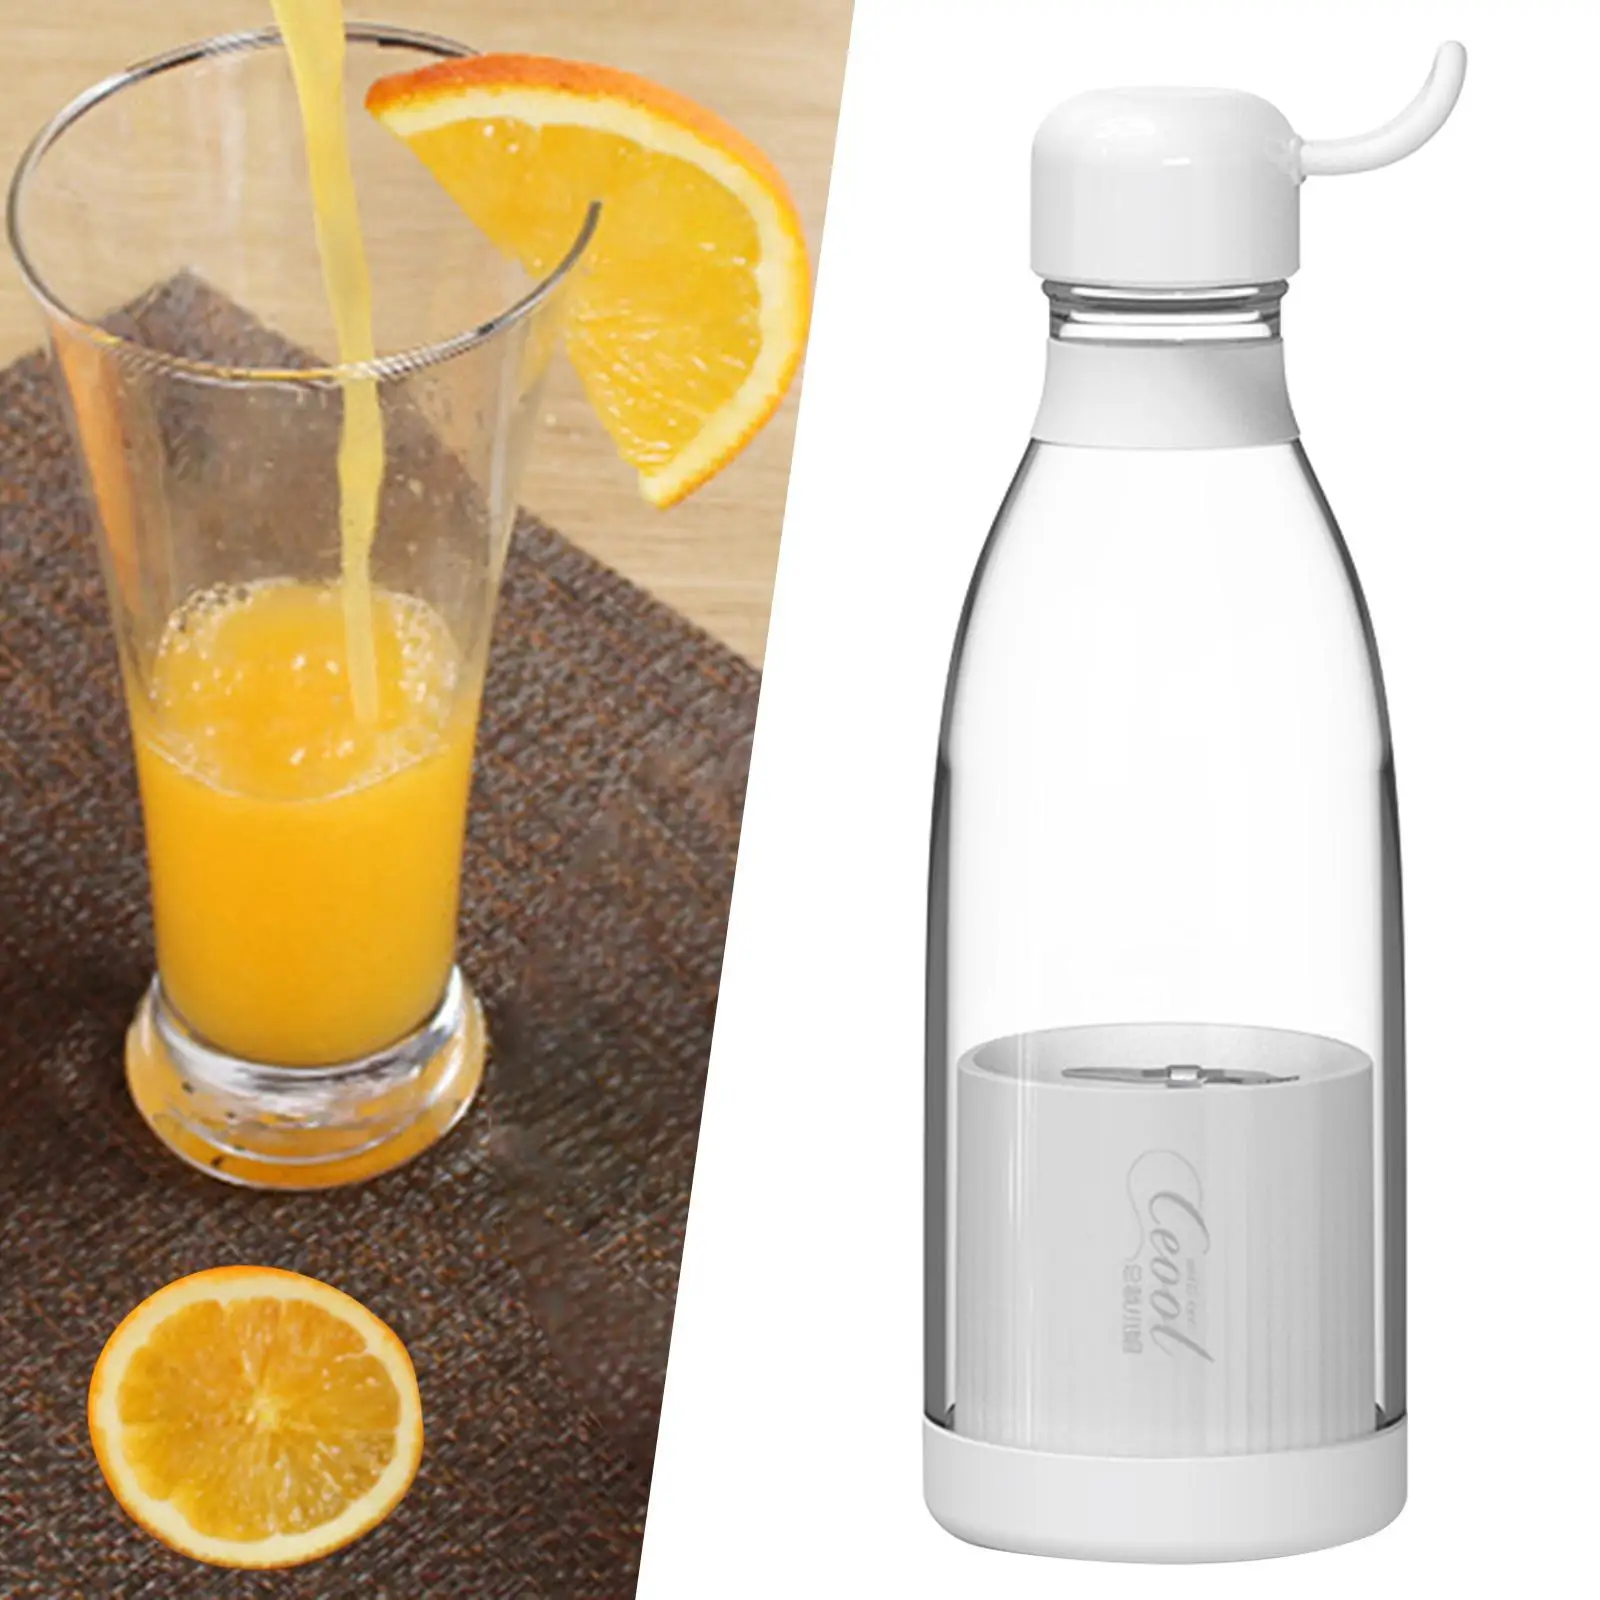 Blender Hand Held Food Grade PC White Removable for Smoothies Camping Nuts